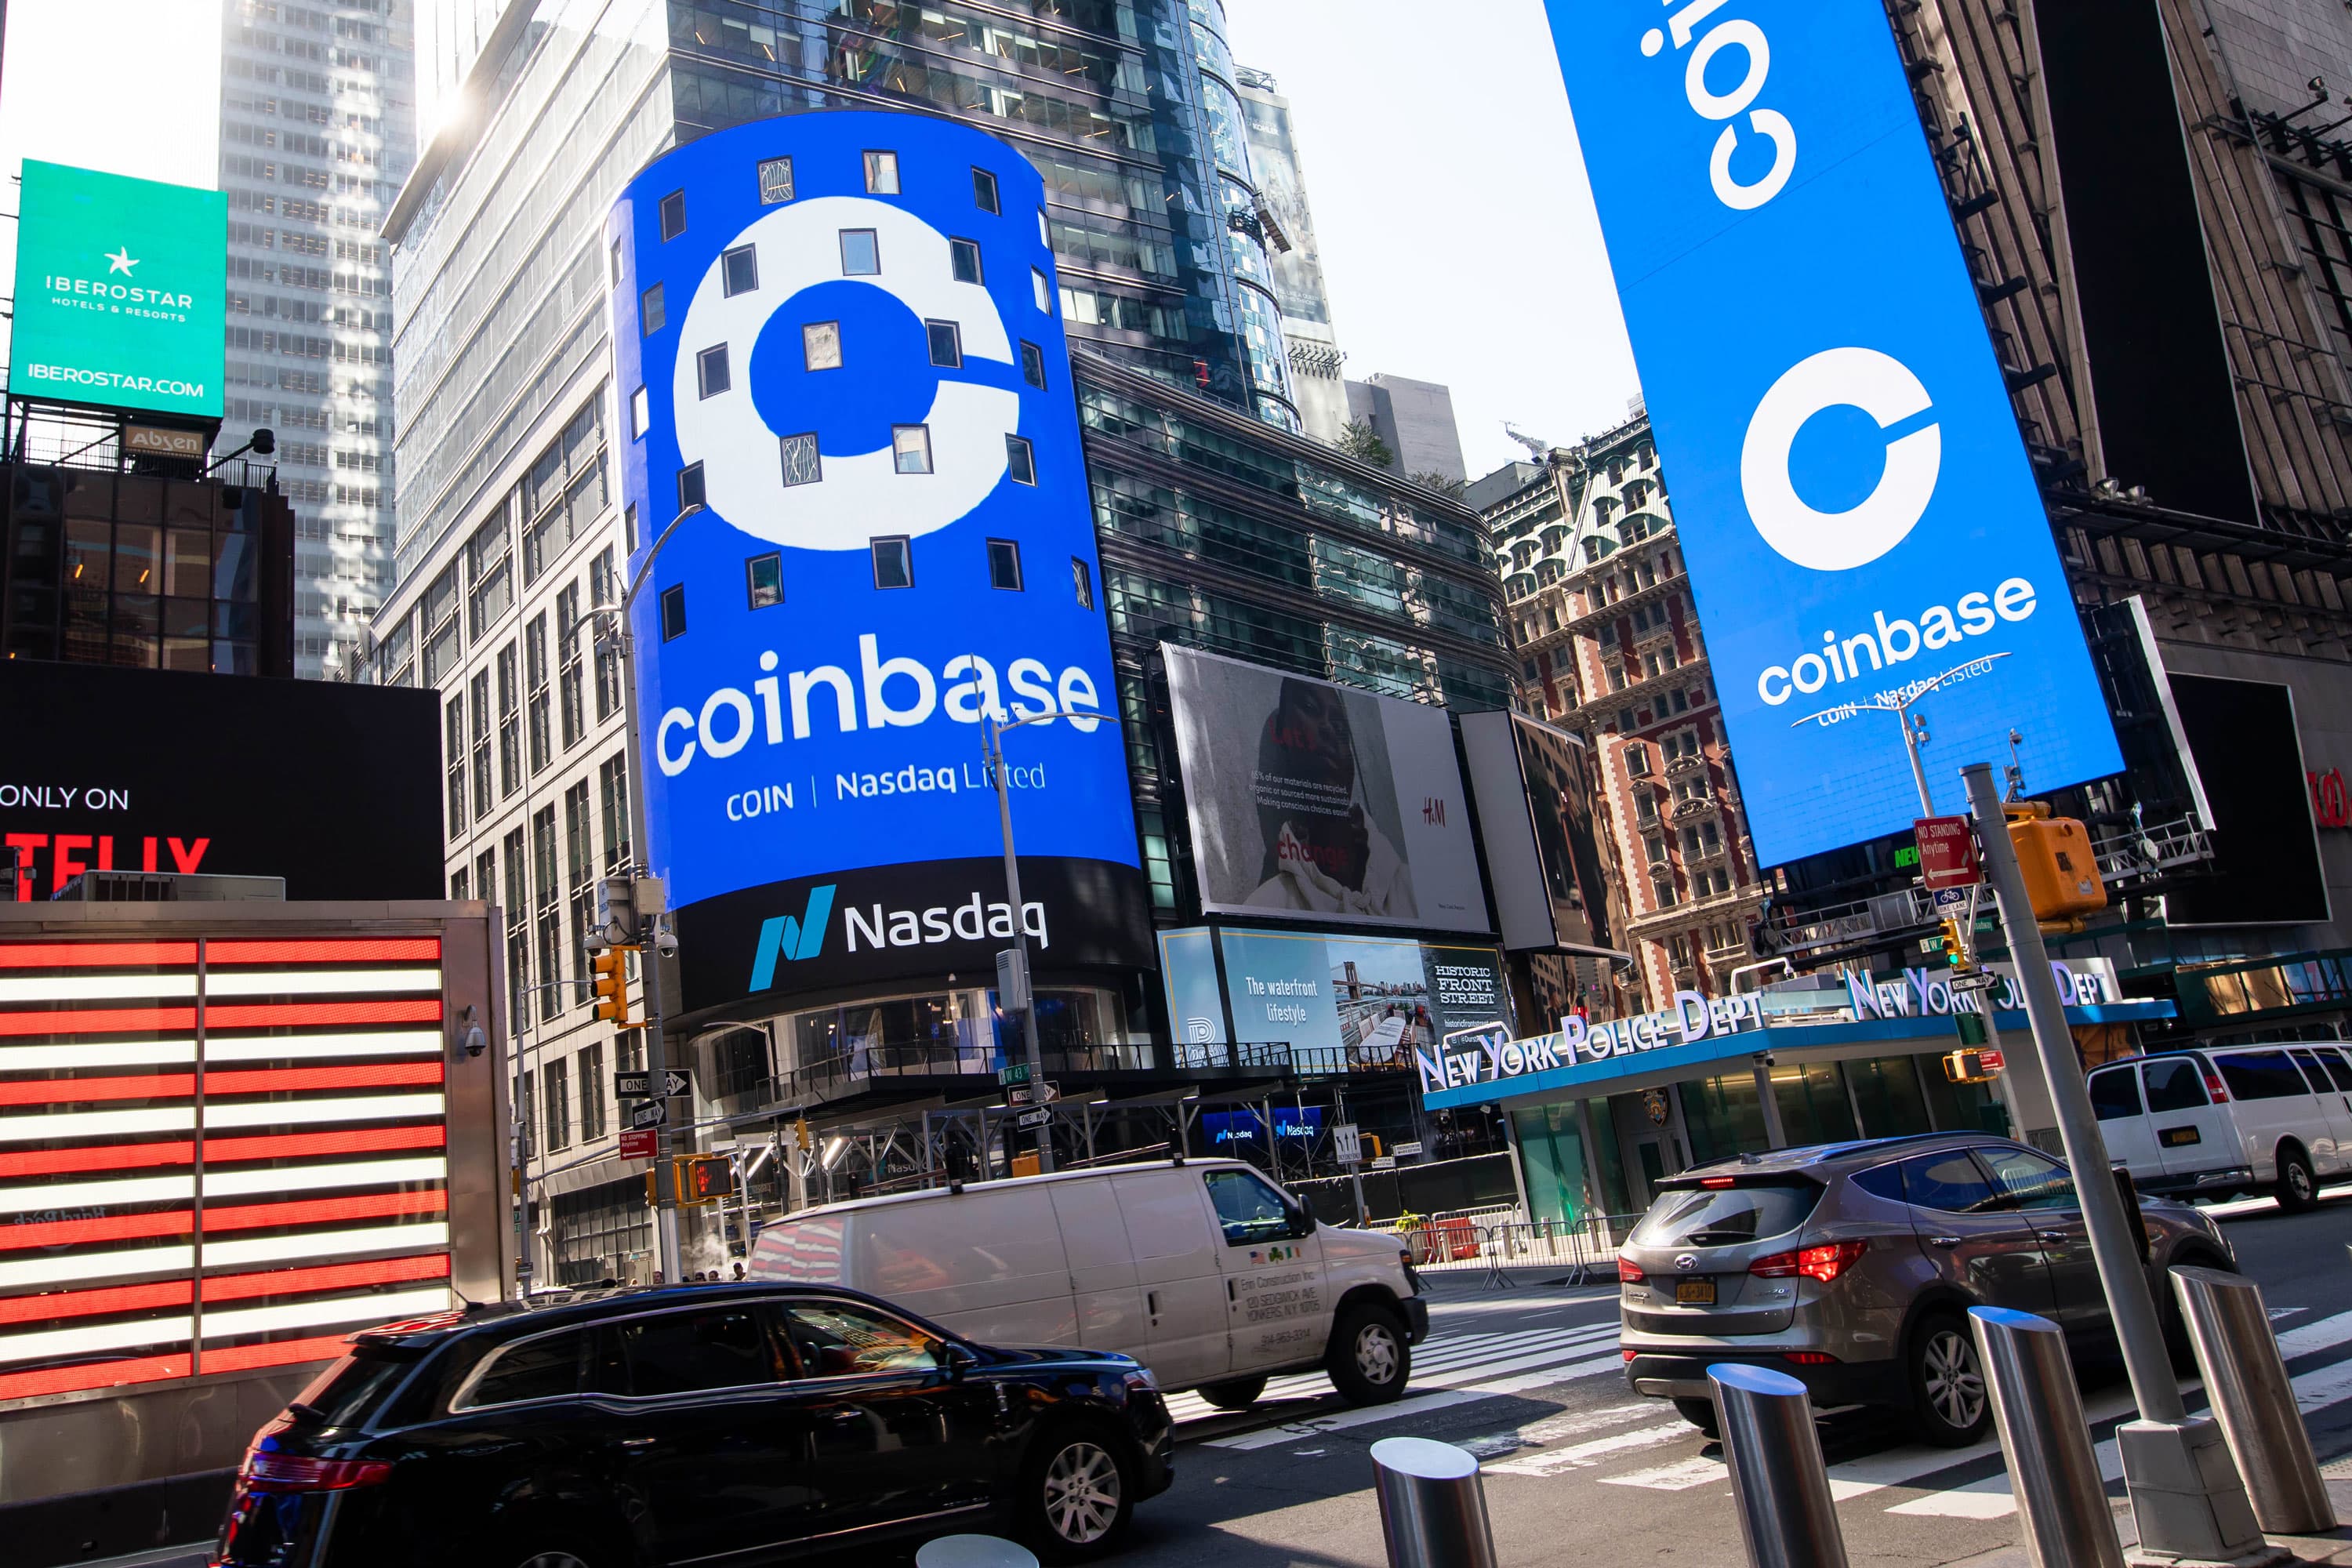 Despite the cryptocurrency contagion, the investment case for the next generation of trading stocks like Coinbase and SoFi